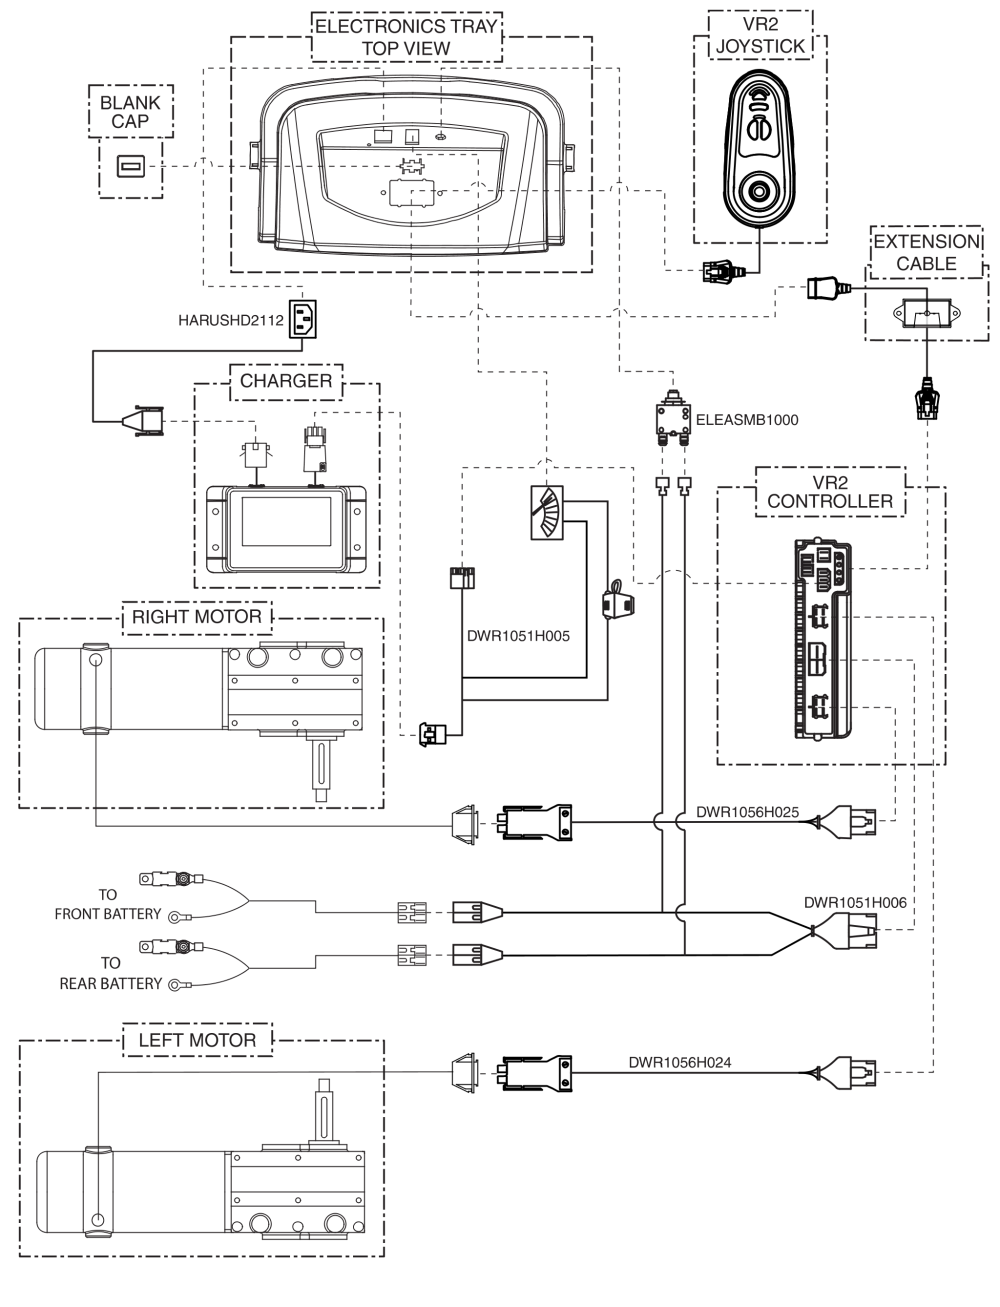 Electrical System Diagram, Vr2, Jazzy Select 14 parts diagram